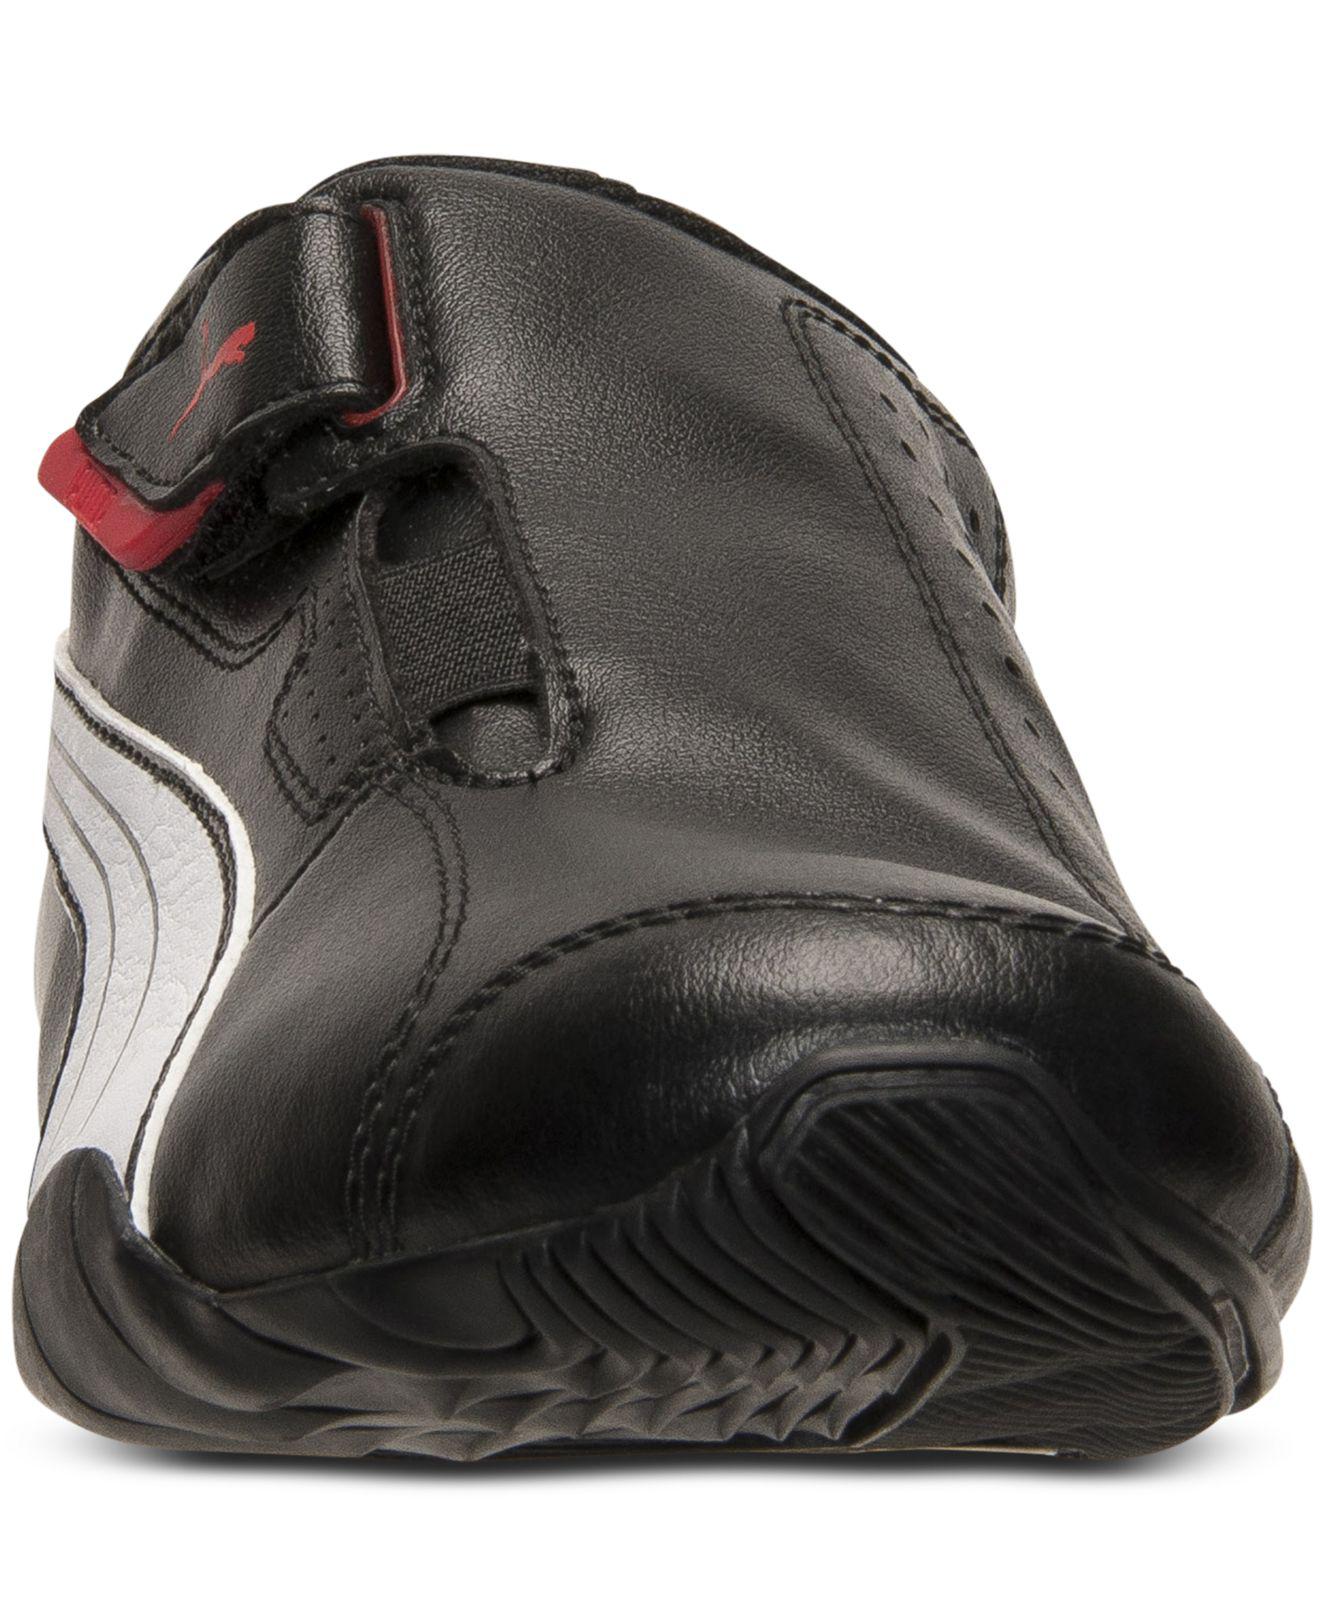 PUMA Synthetic Redon Move Shoes in Black/White/Red (Black) for Men - Lyst